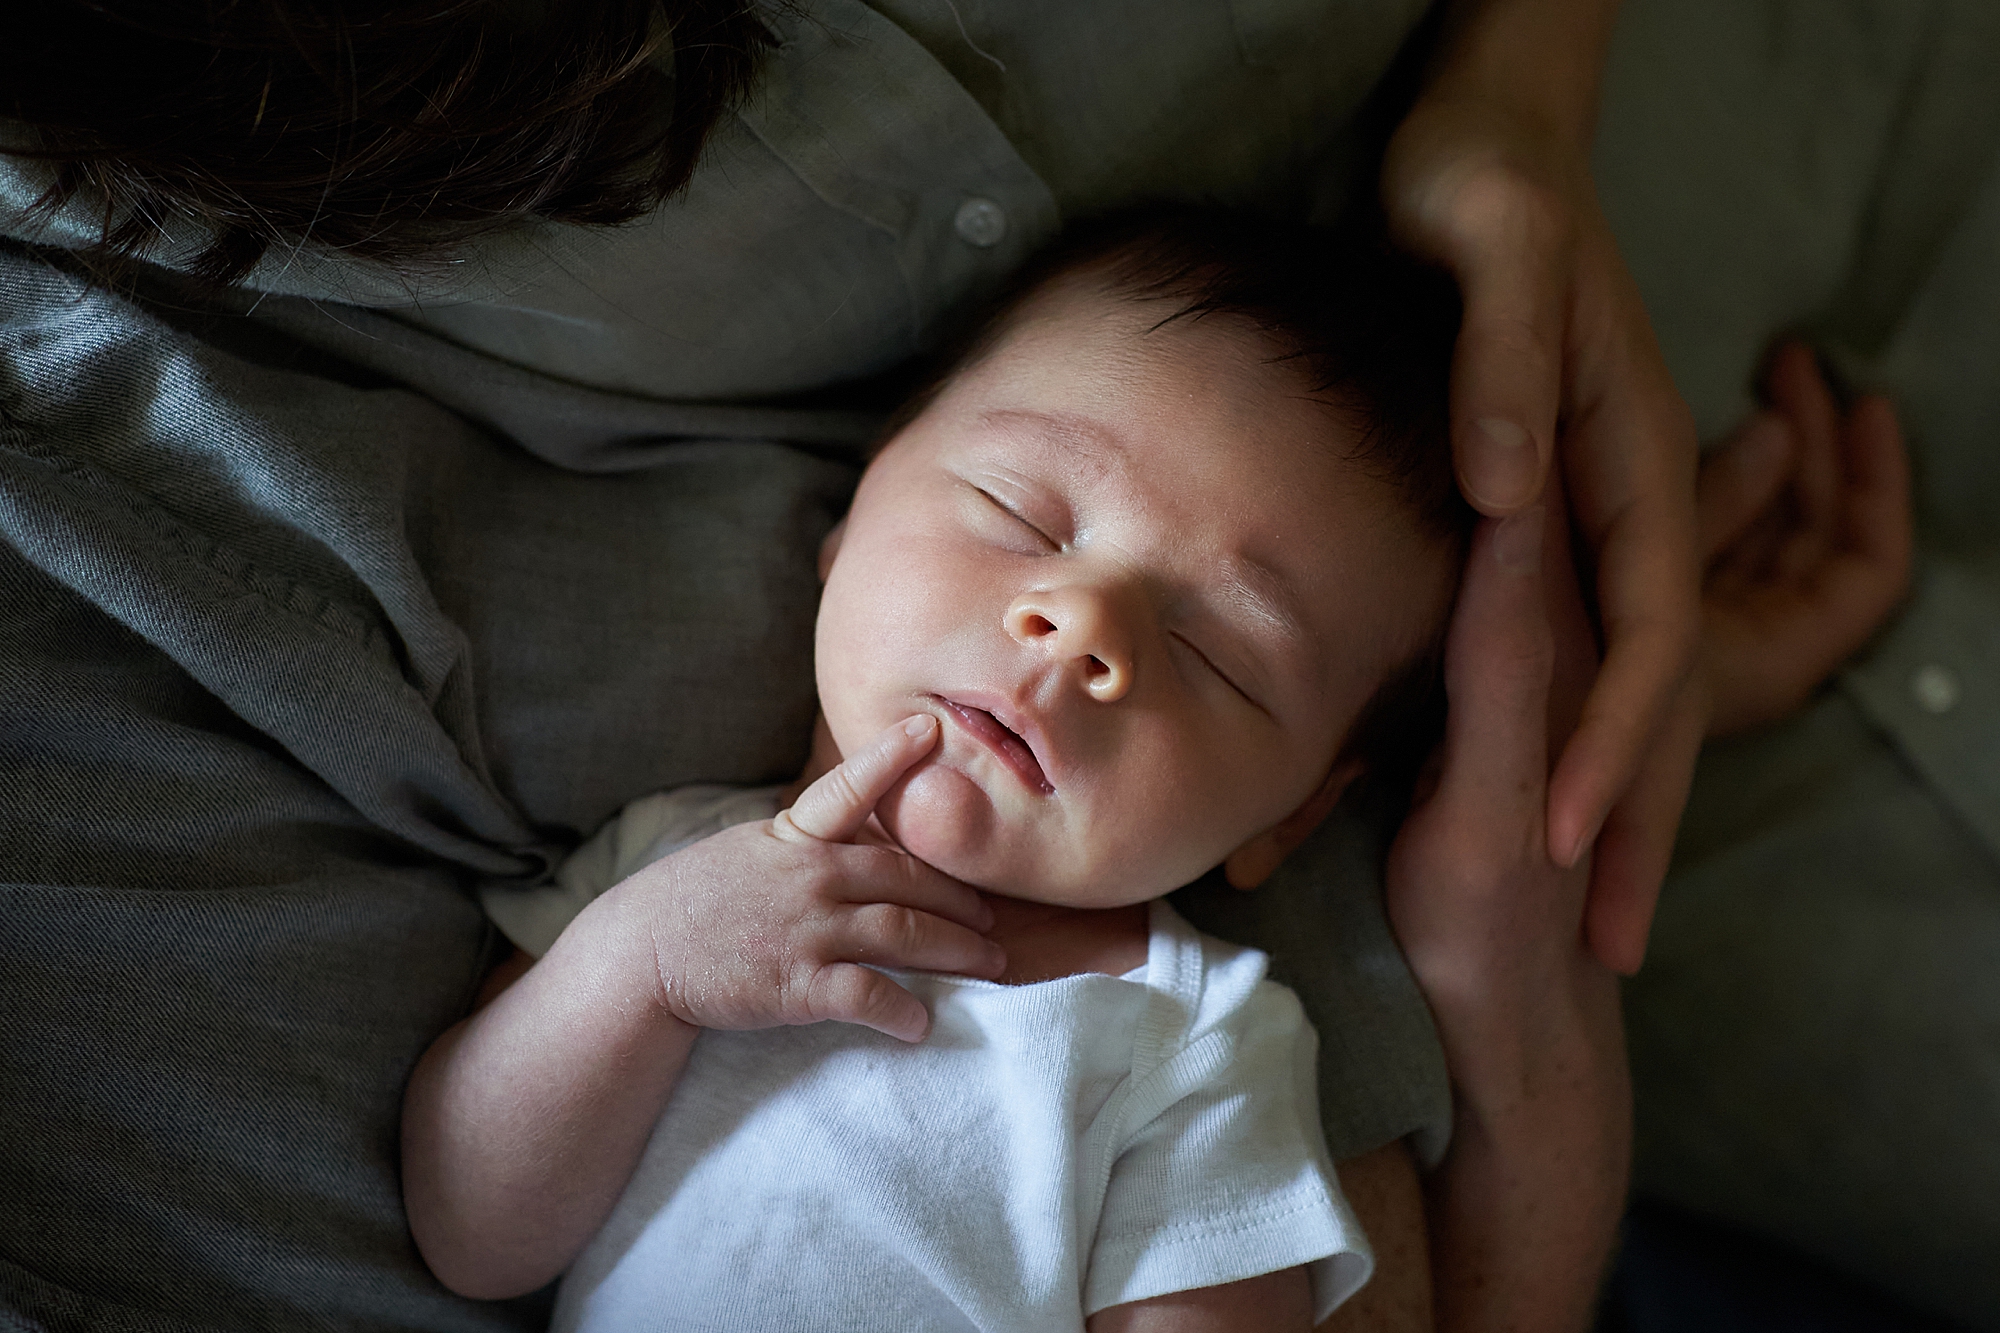 A newborn baby sleeping peacefully on an adult's chest with a hand gently resting on the baby's head.